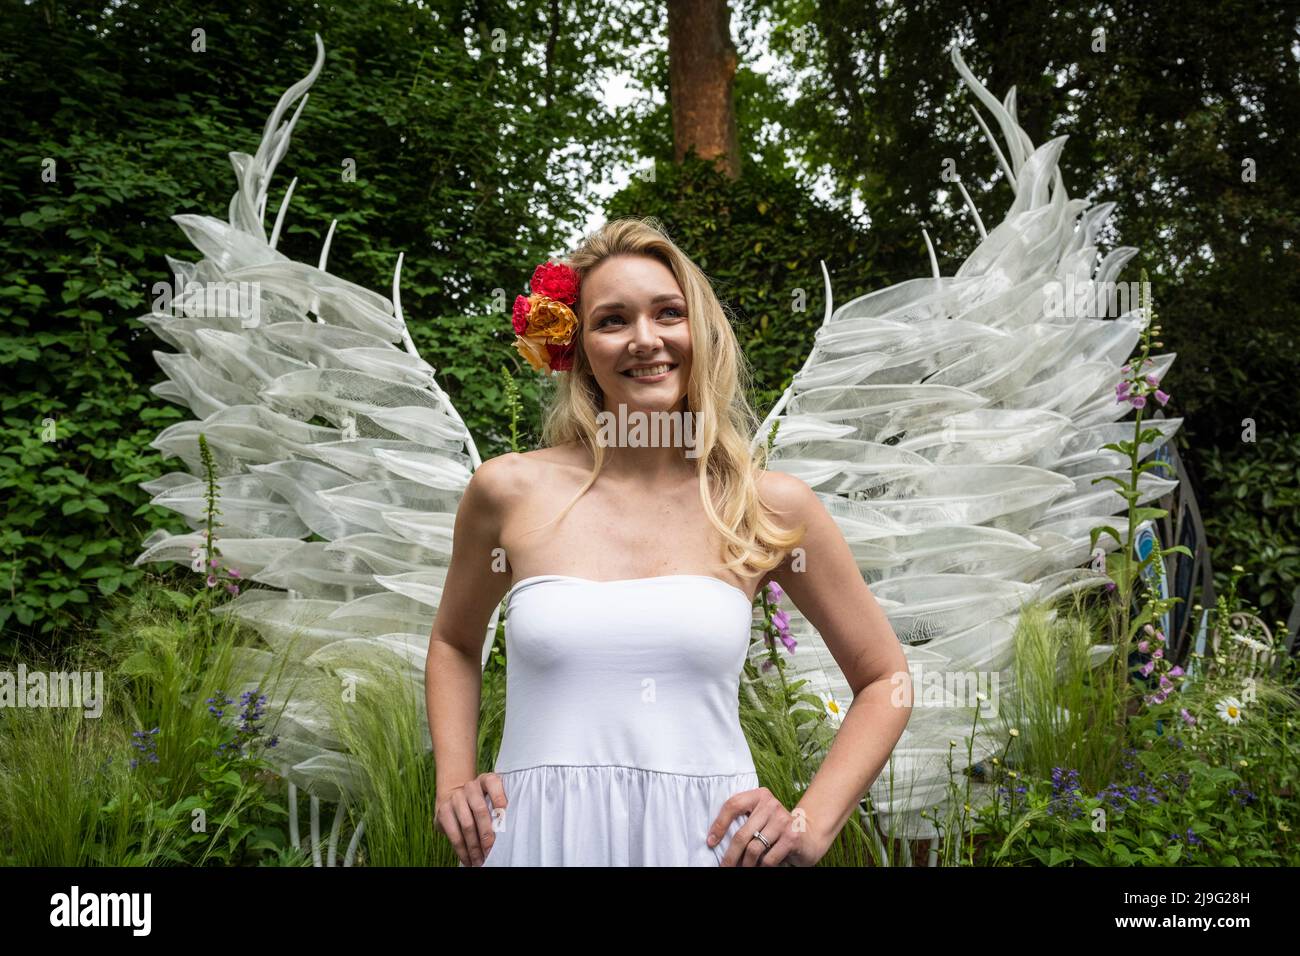 London, UK.  23 May 2022. Violinist Sally Potterton at the Glass Garden Stand at the press day of the RHS Chelsea Flower Show in the grounds of the Royal Hospital Chelsea.  The show runs to 28 May 2022.    Credit: Stephen Chung / Alamy Live News Stock Photo